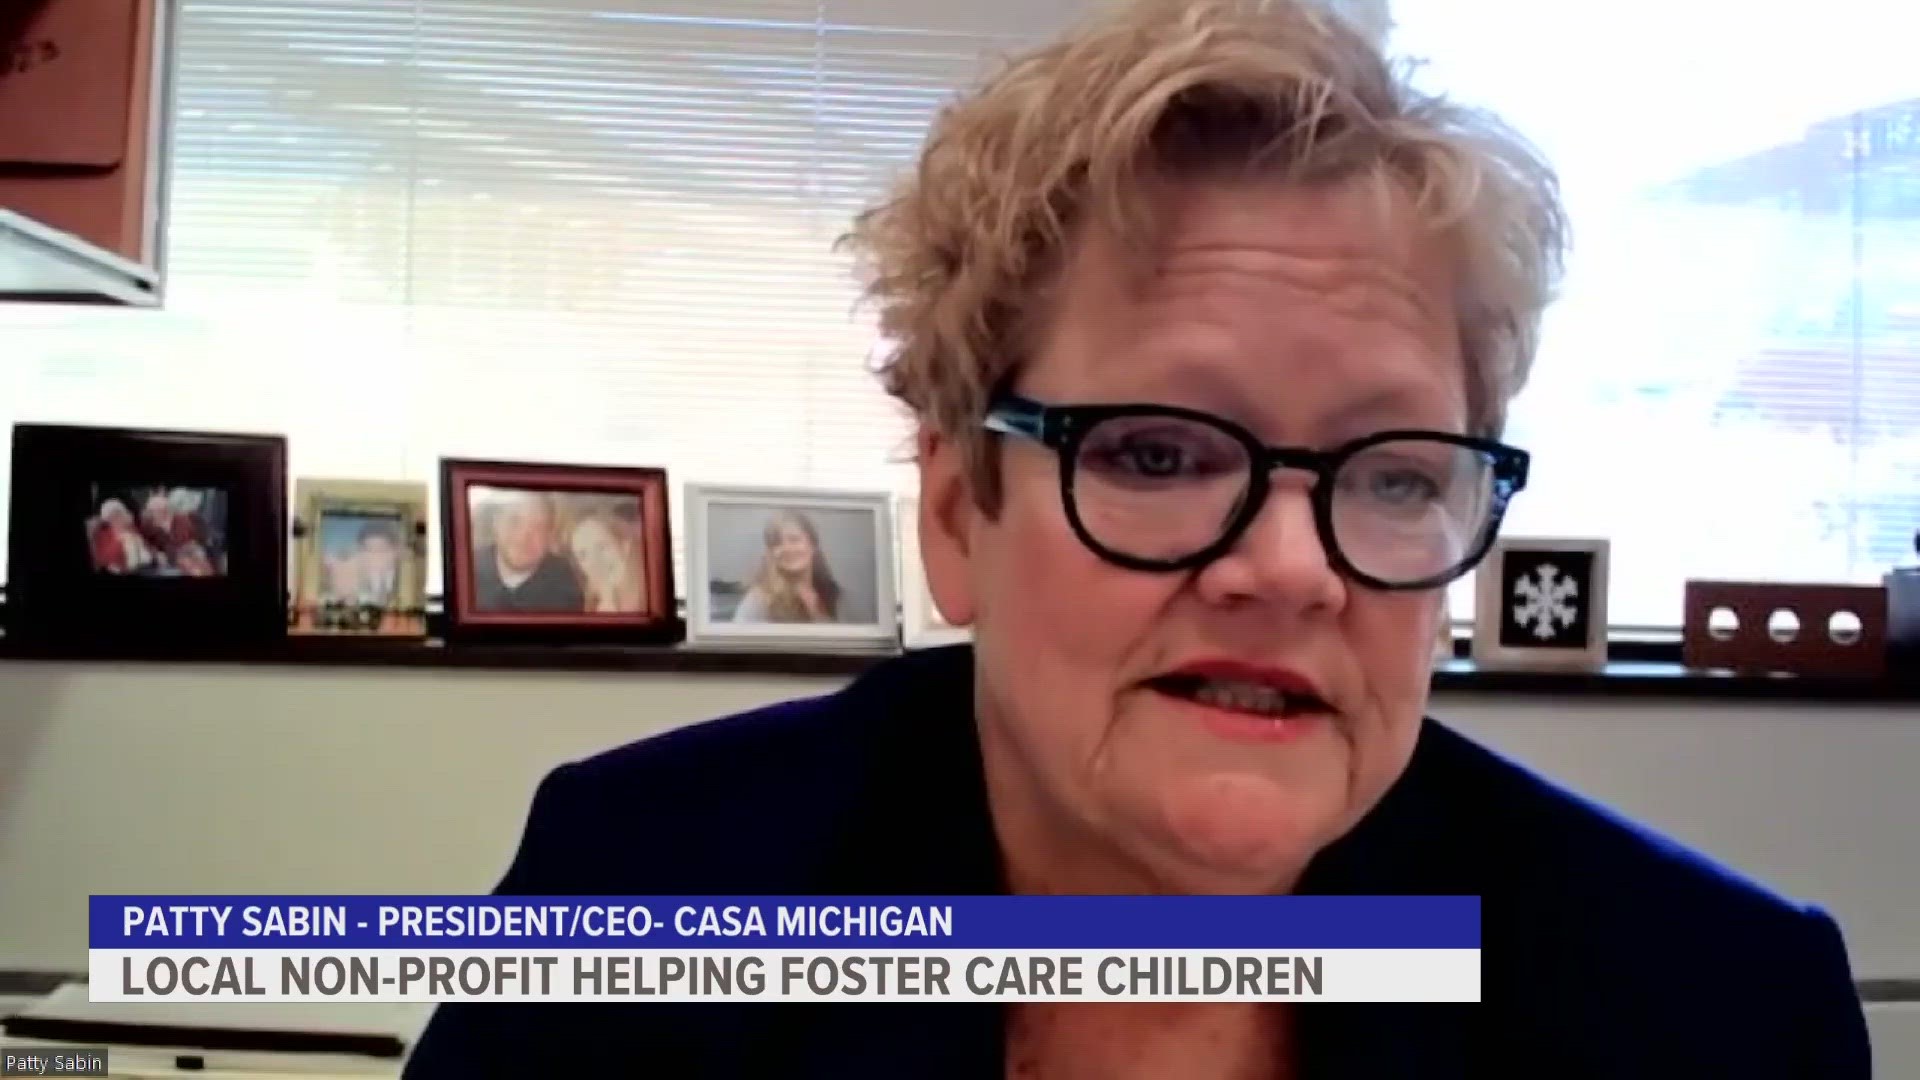 Michigan Court Appointed Special Advocates for Children (CASA) is hoping to change foster care statistics.